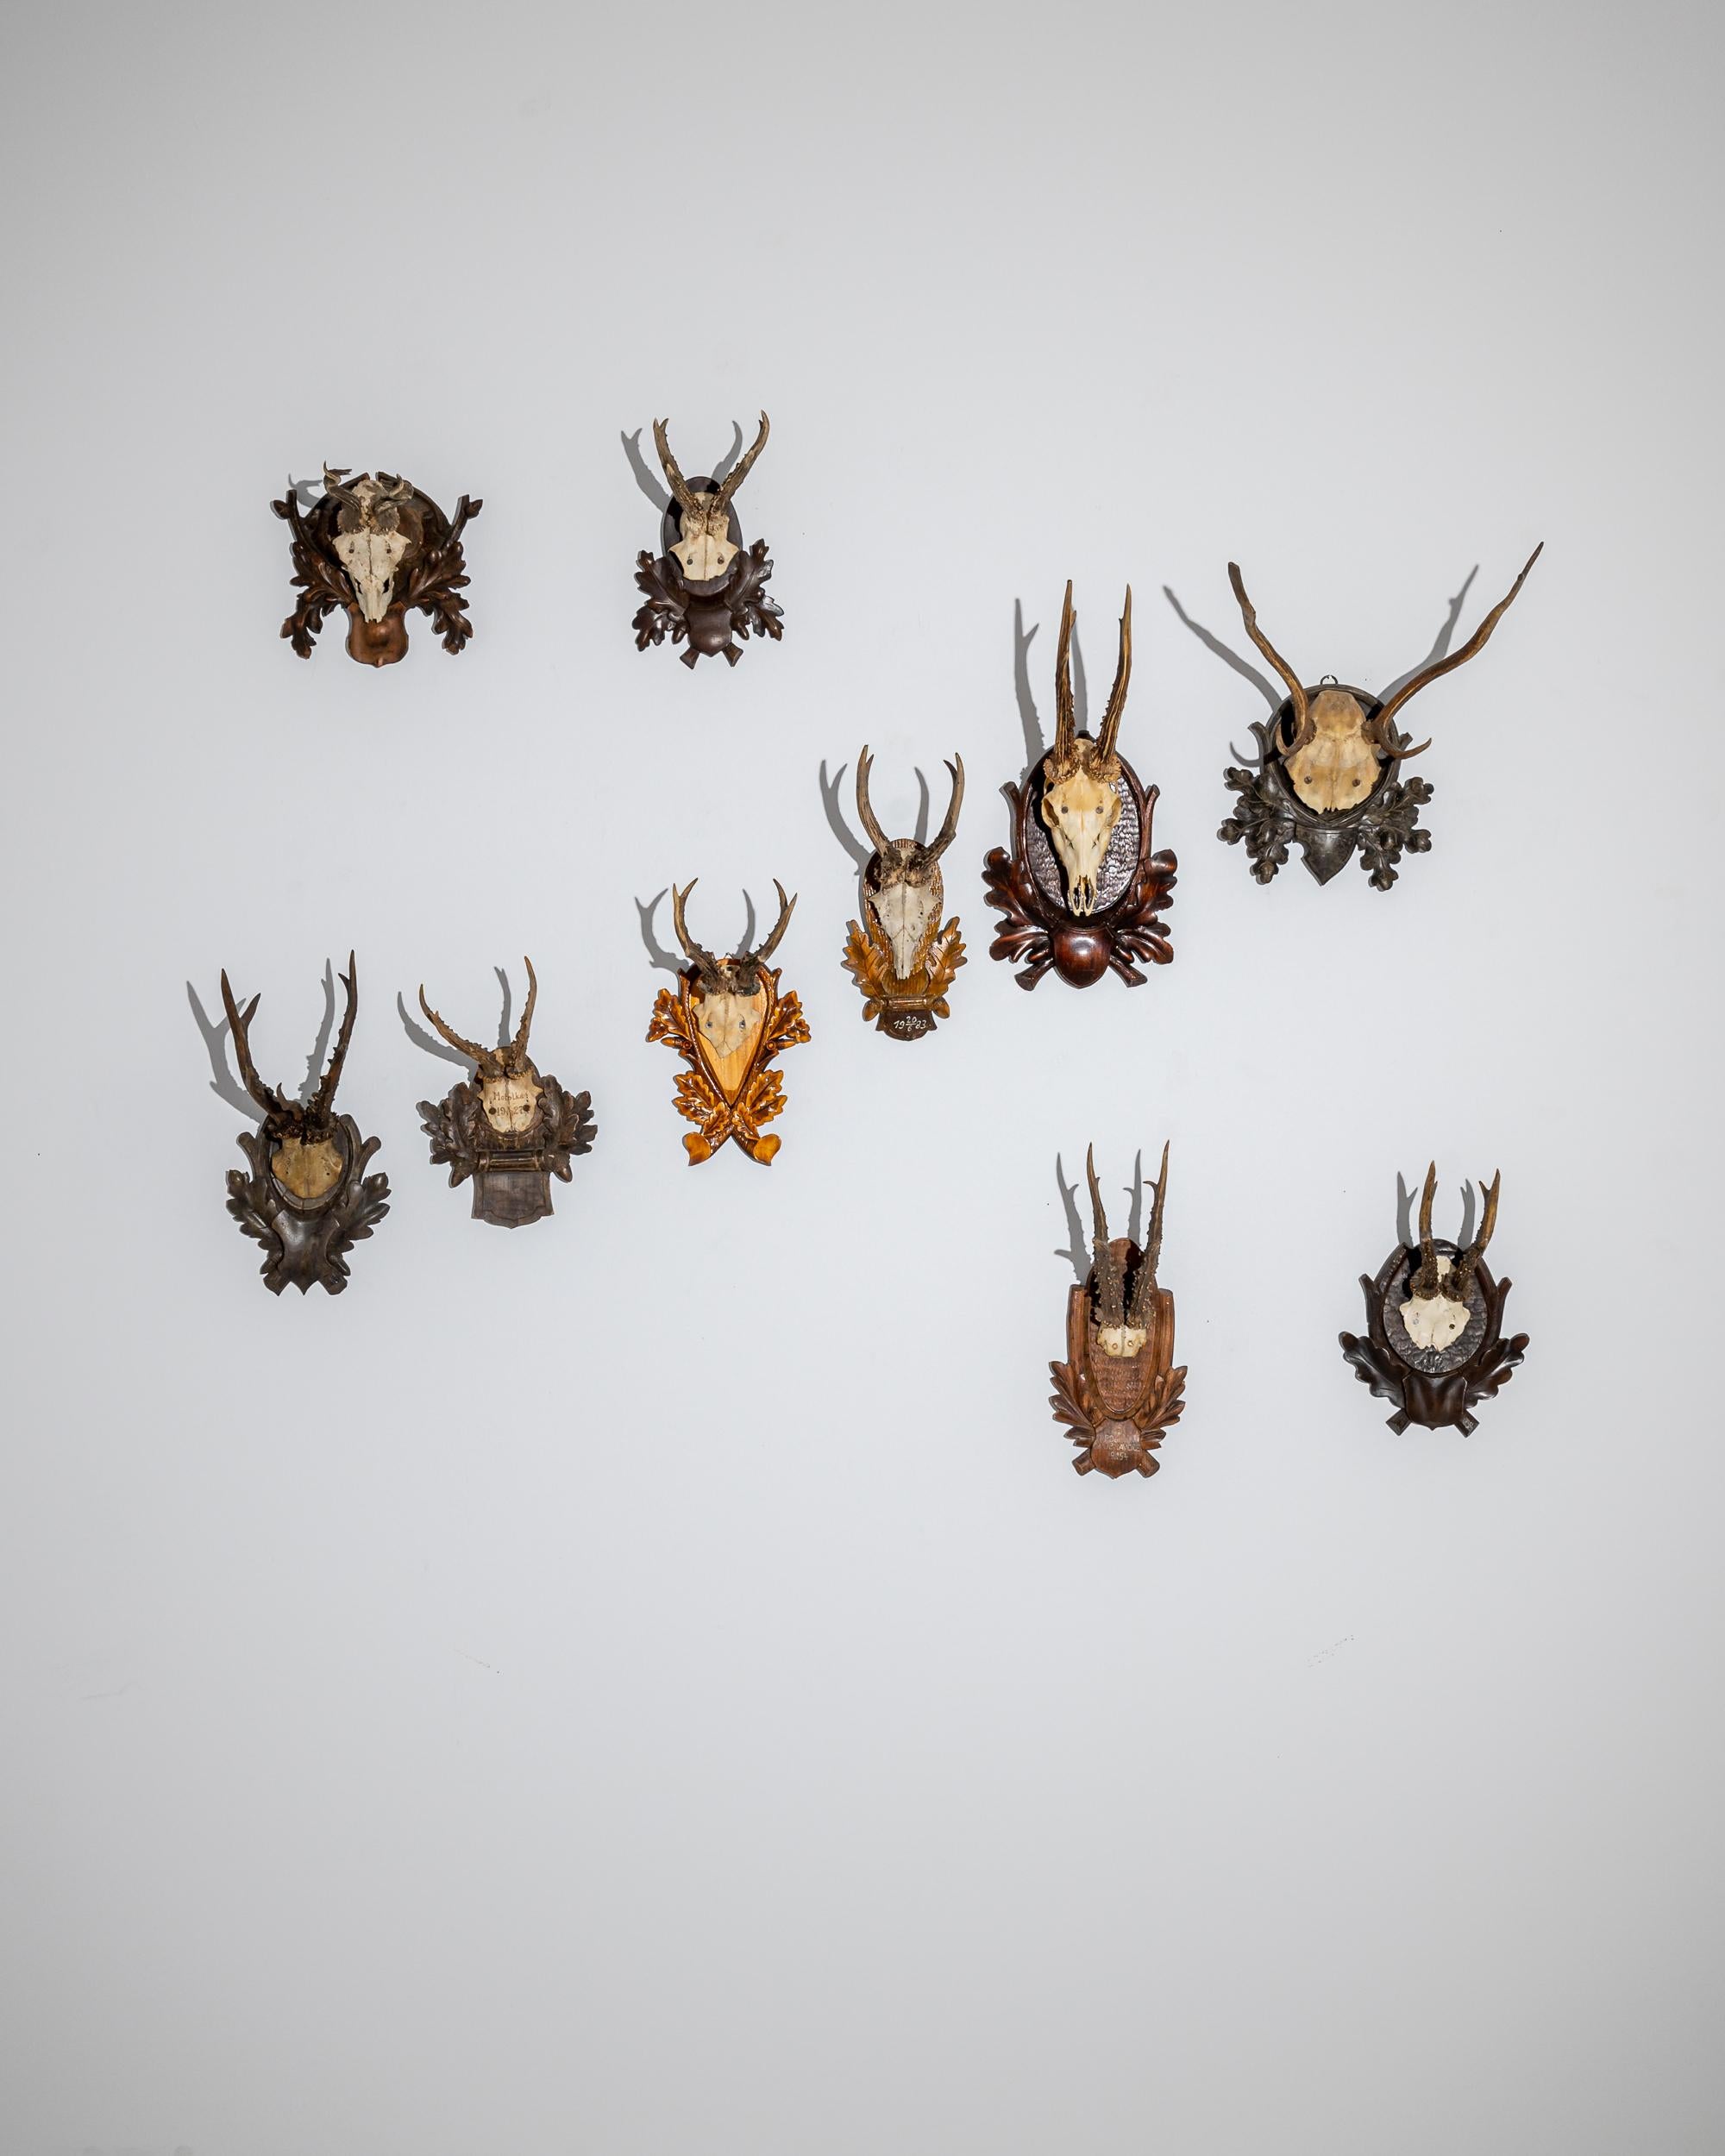 This intriguing collection of animal skull wall decorations was made in the 20th century in 
Central Europe. A traditional pastime, every accent piece features a wooden base carved in the shape of an oak leaf wreath that artfully frames the scalp